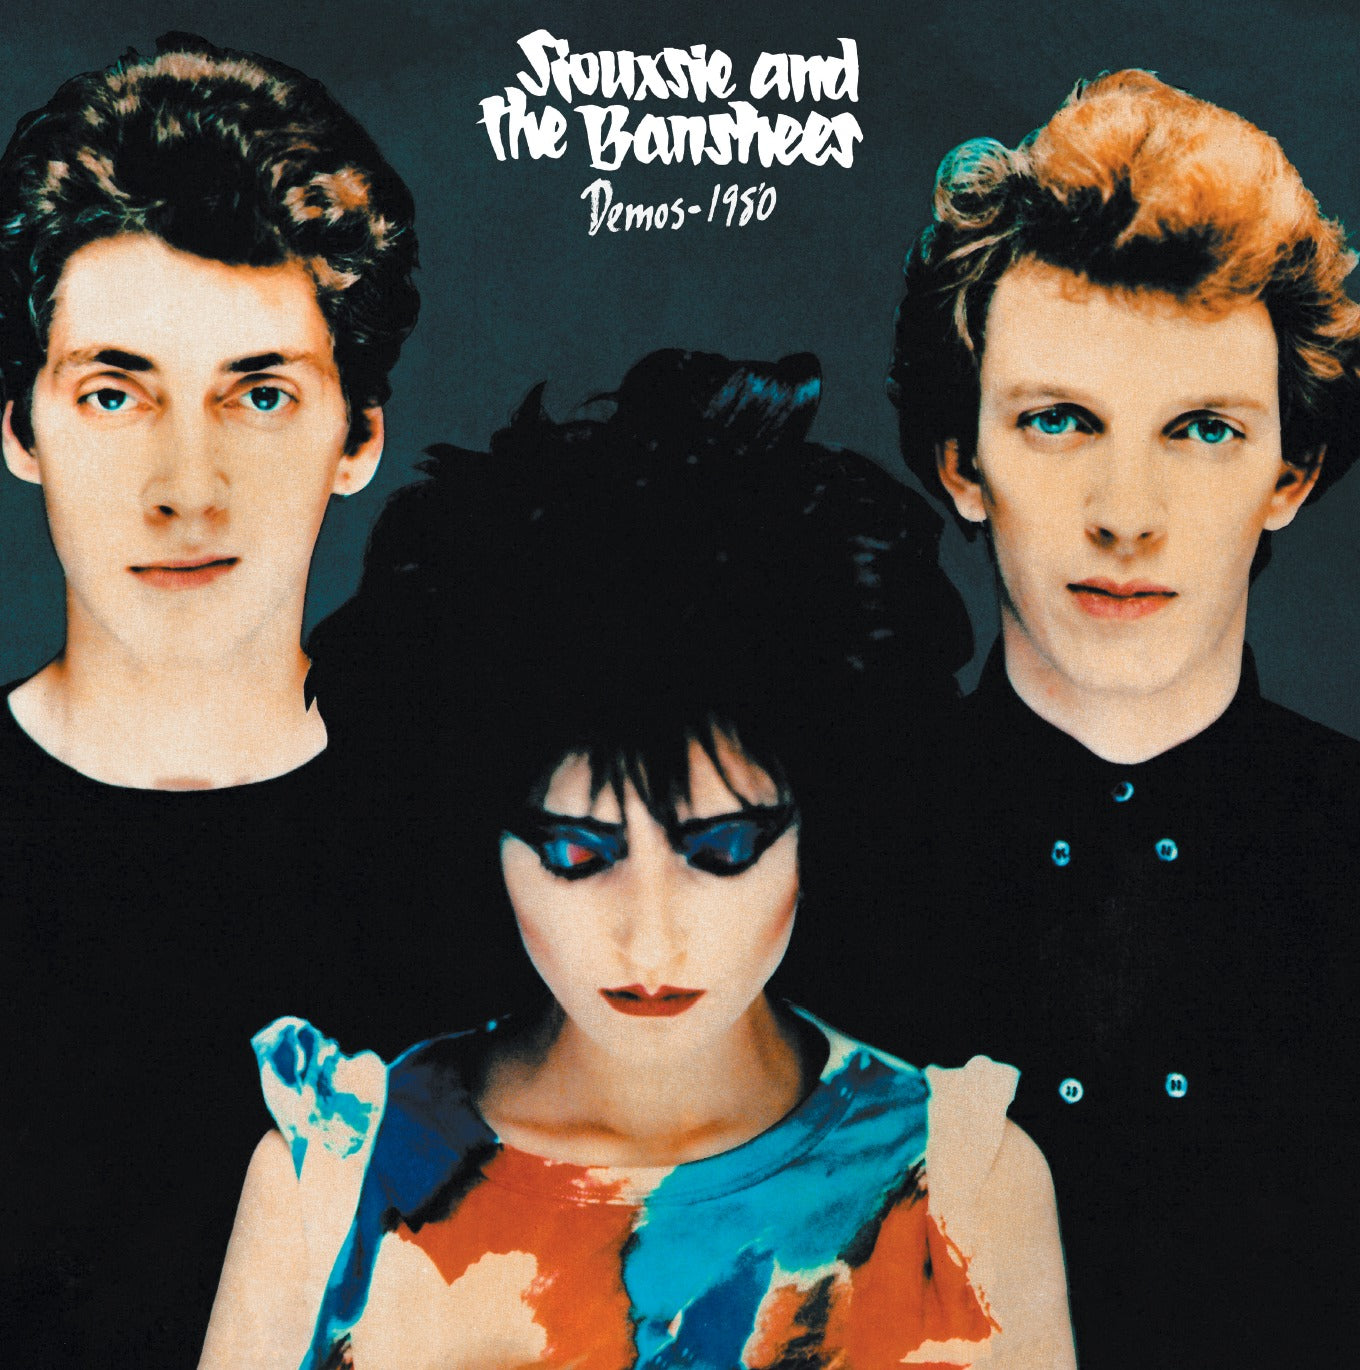 Siouxsie And The Banshees "Polydor and Warner Chappell Demos" LP